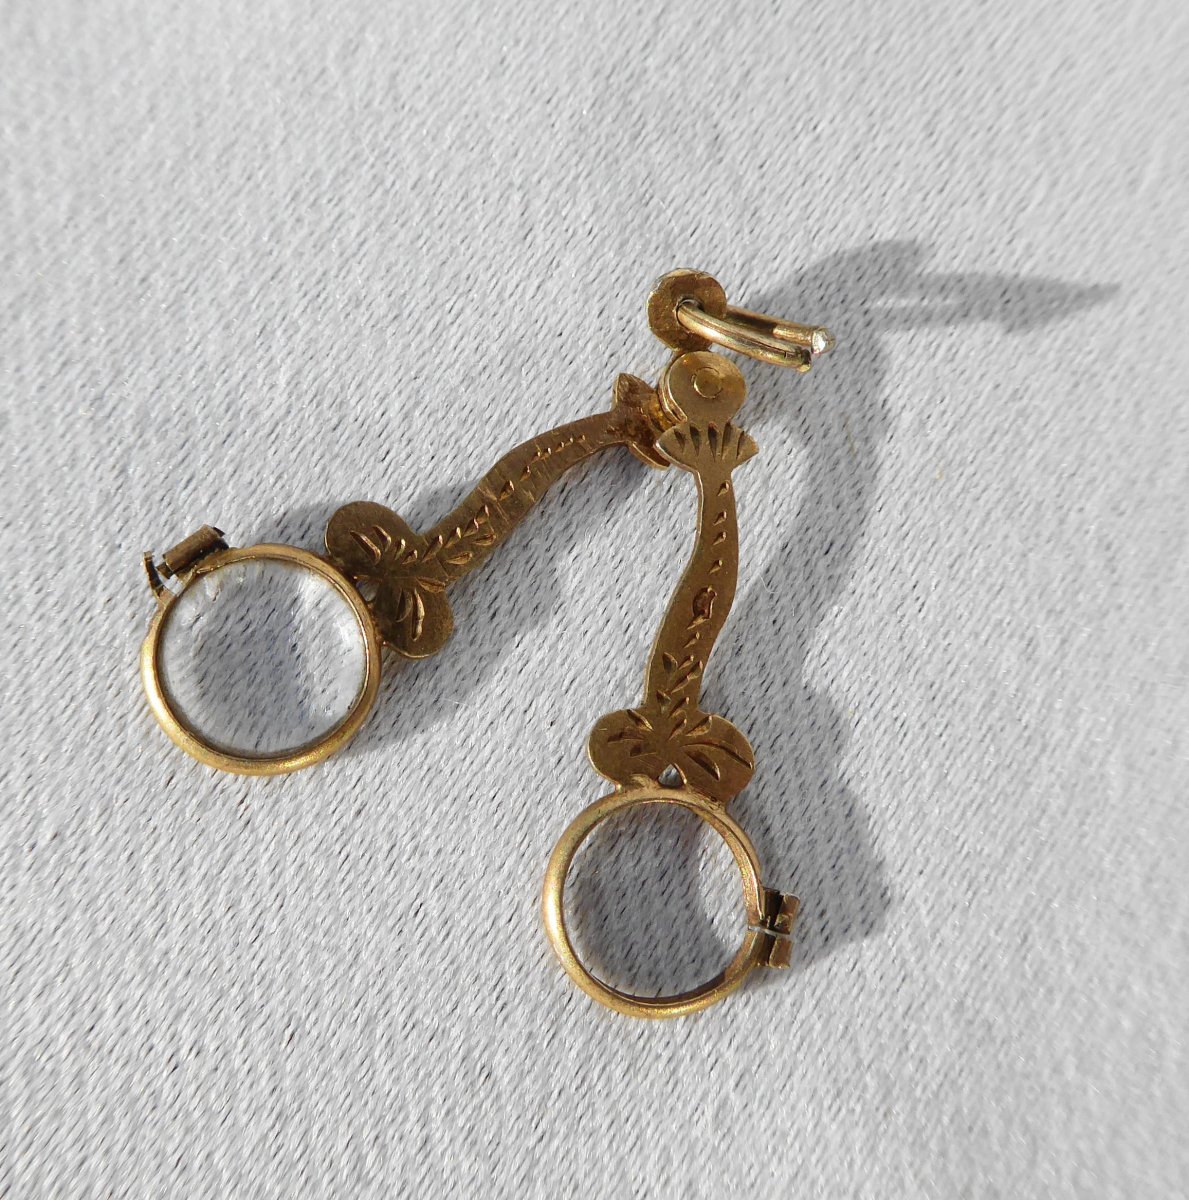 Pair Of Miniature Glasses In Sterling Silver Besicles Maniere d'Y See 1830 Bru Fashion Doll-photo-2